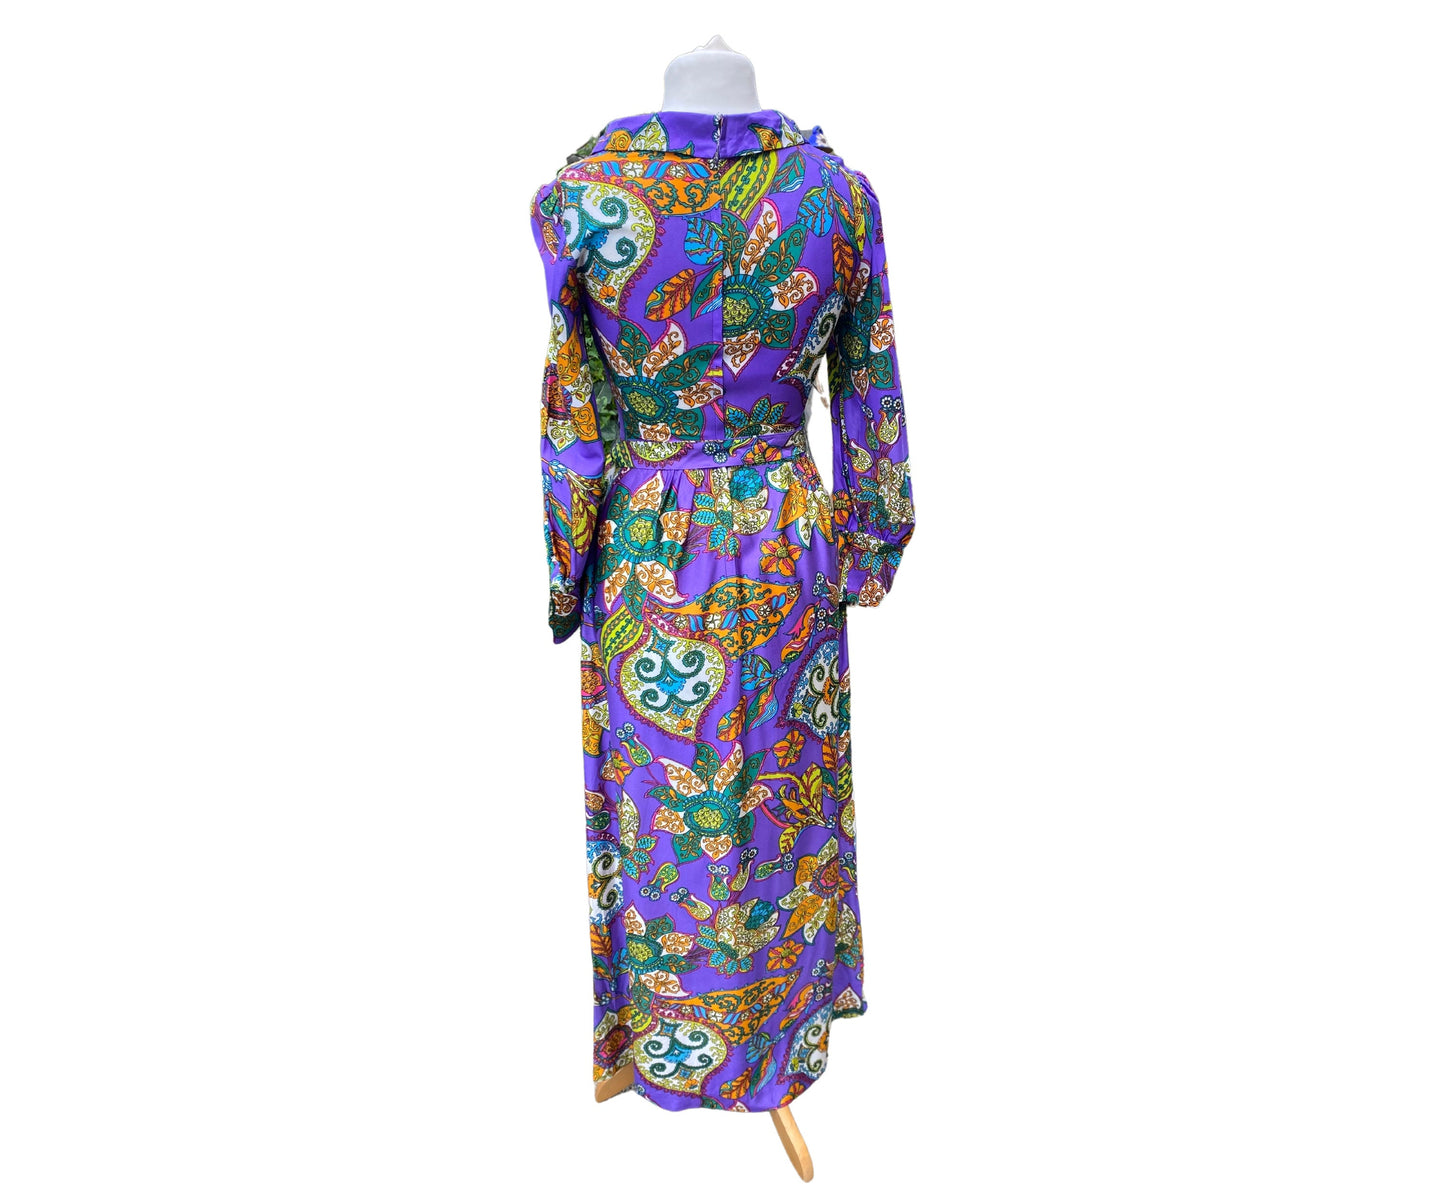 60s /70s purple paisley, long sleeved maxi dress . Approx UK size 10-12